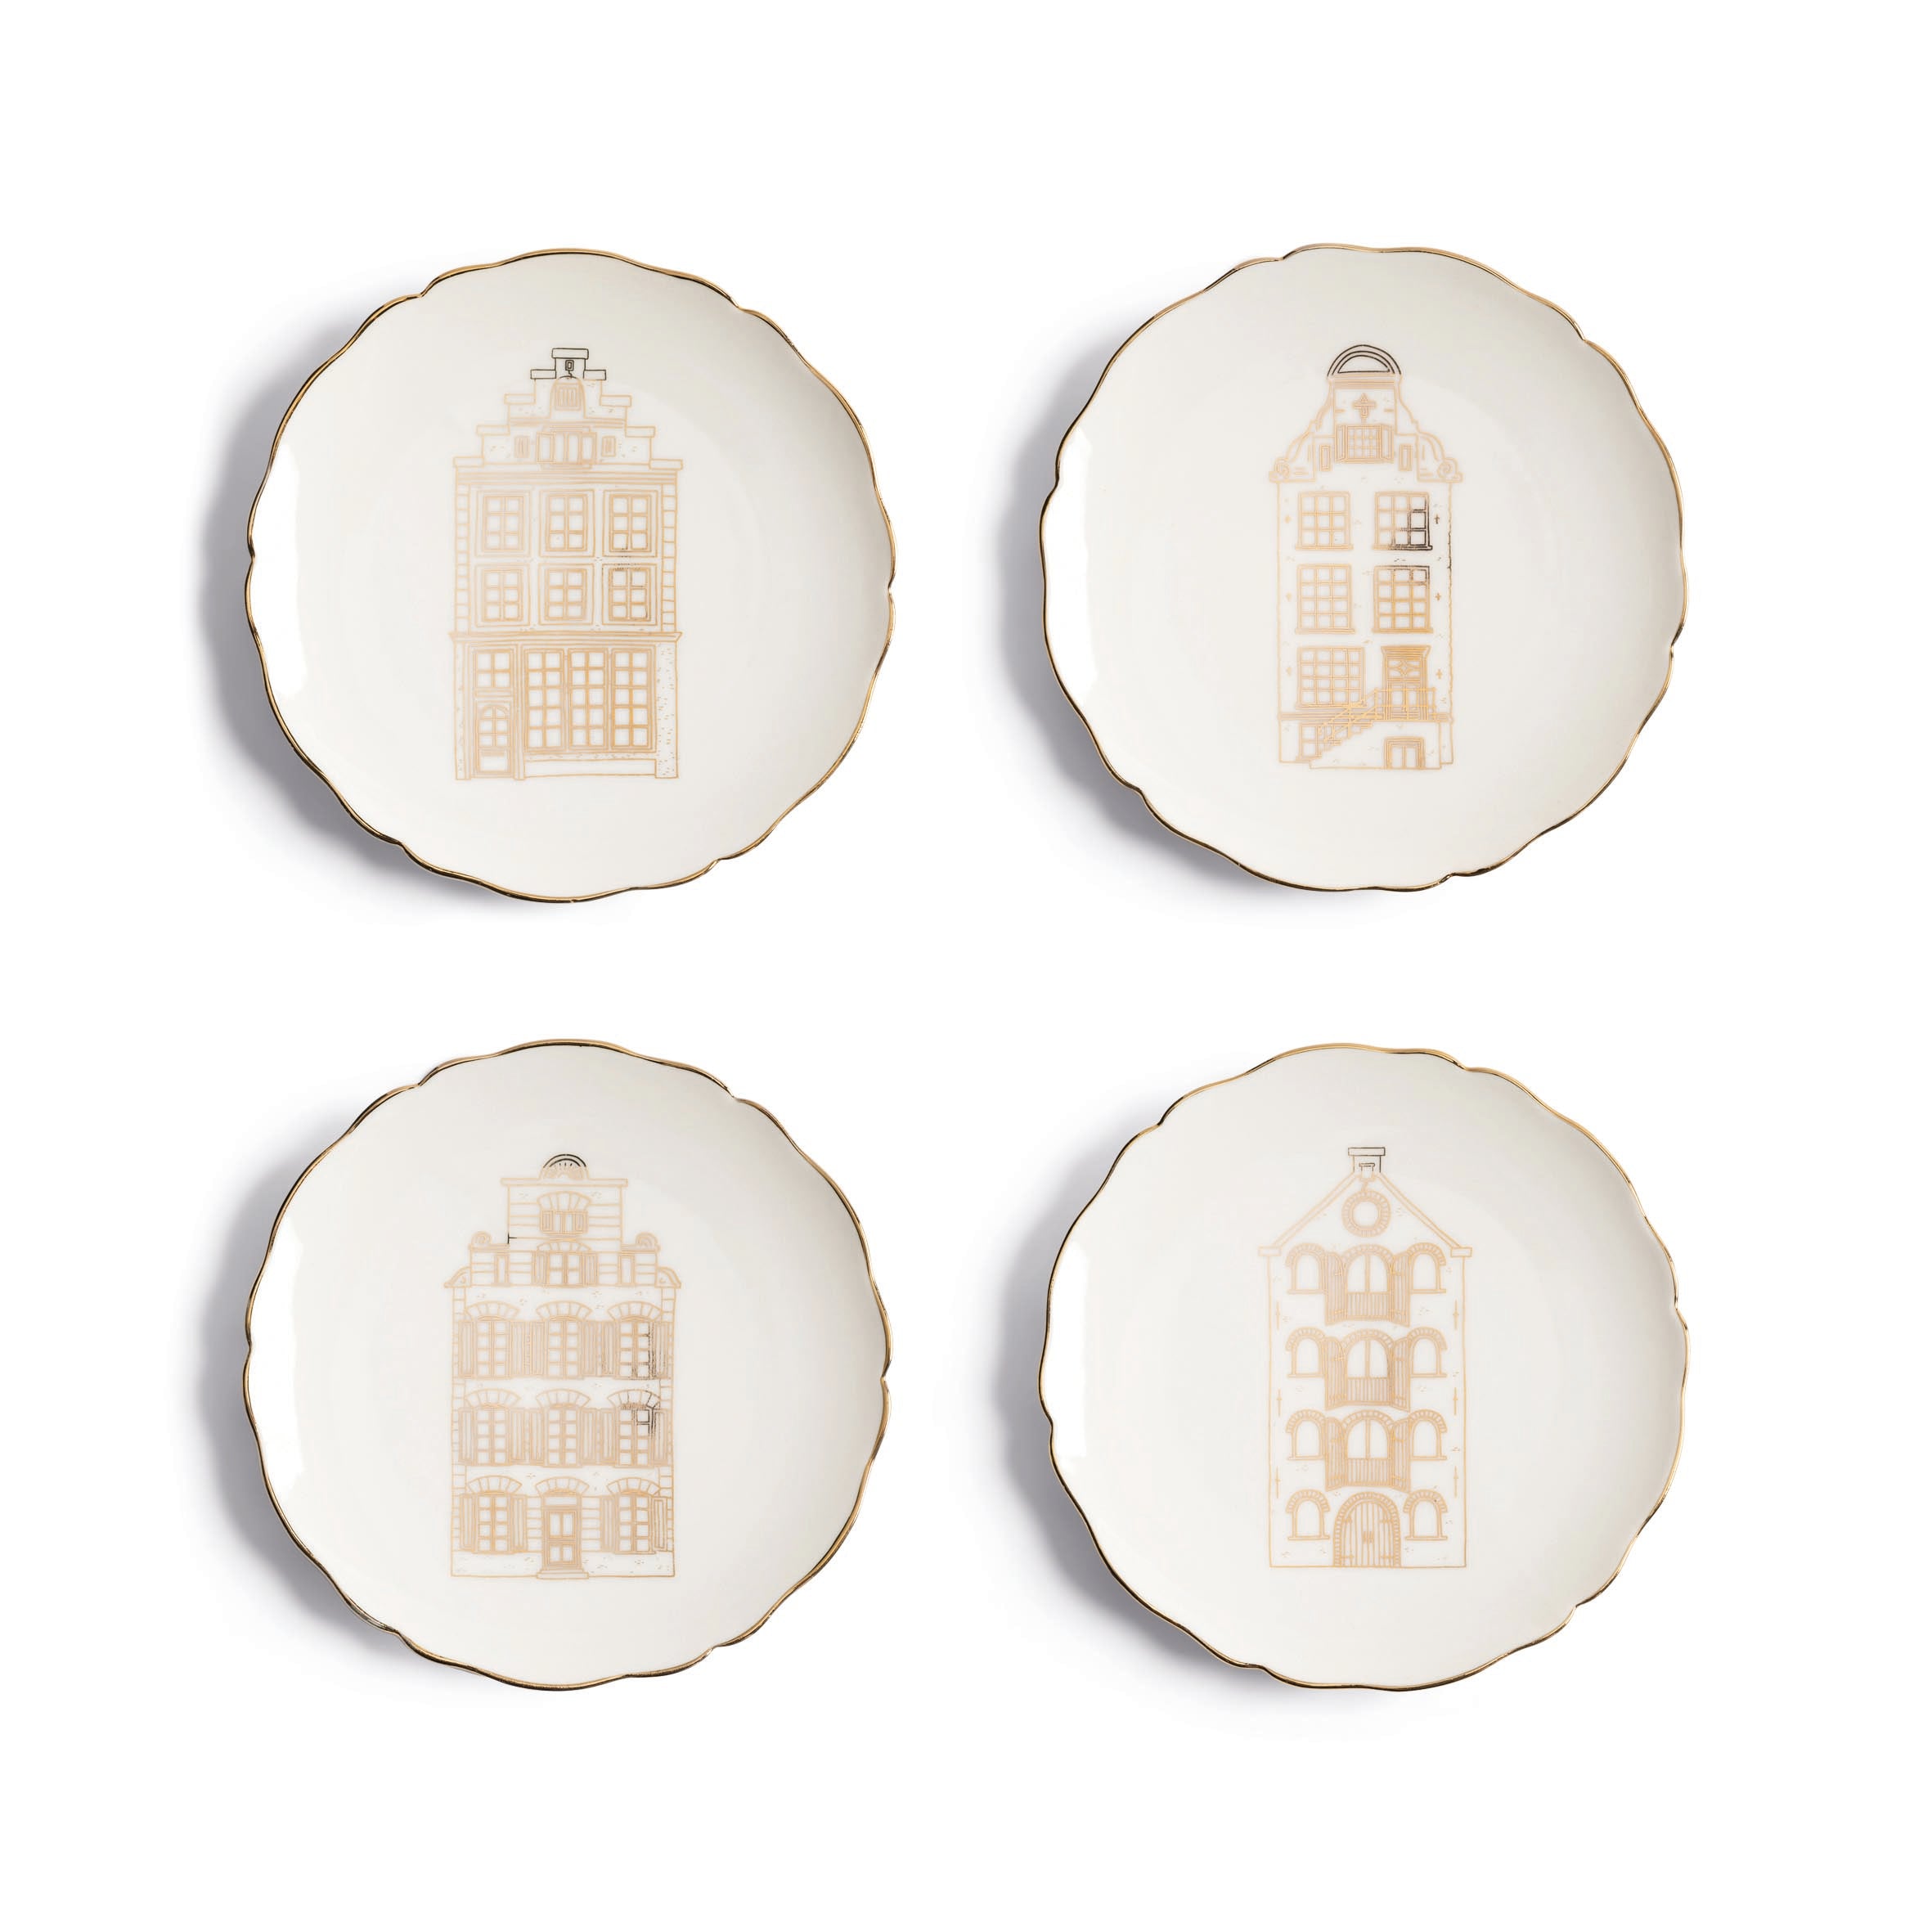 Canal House Plate - Set of 4